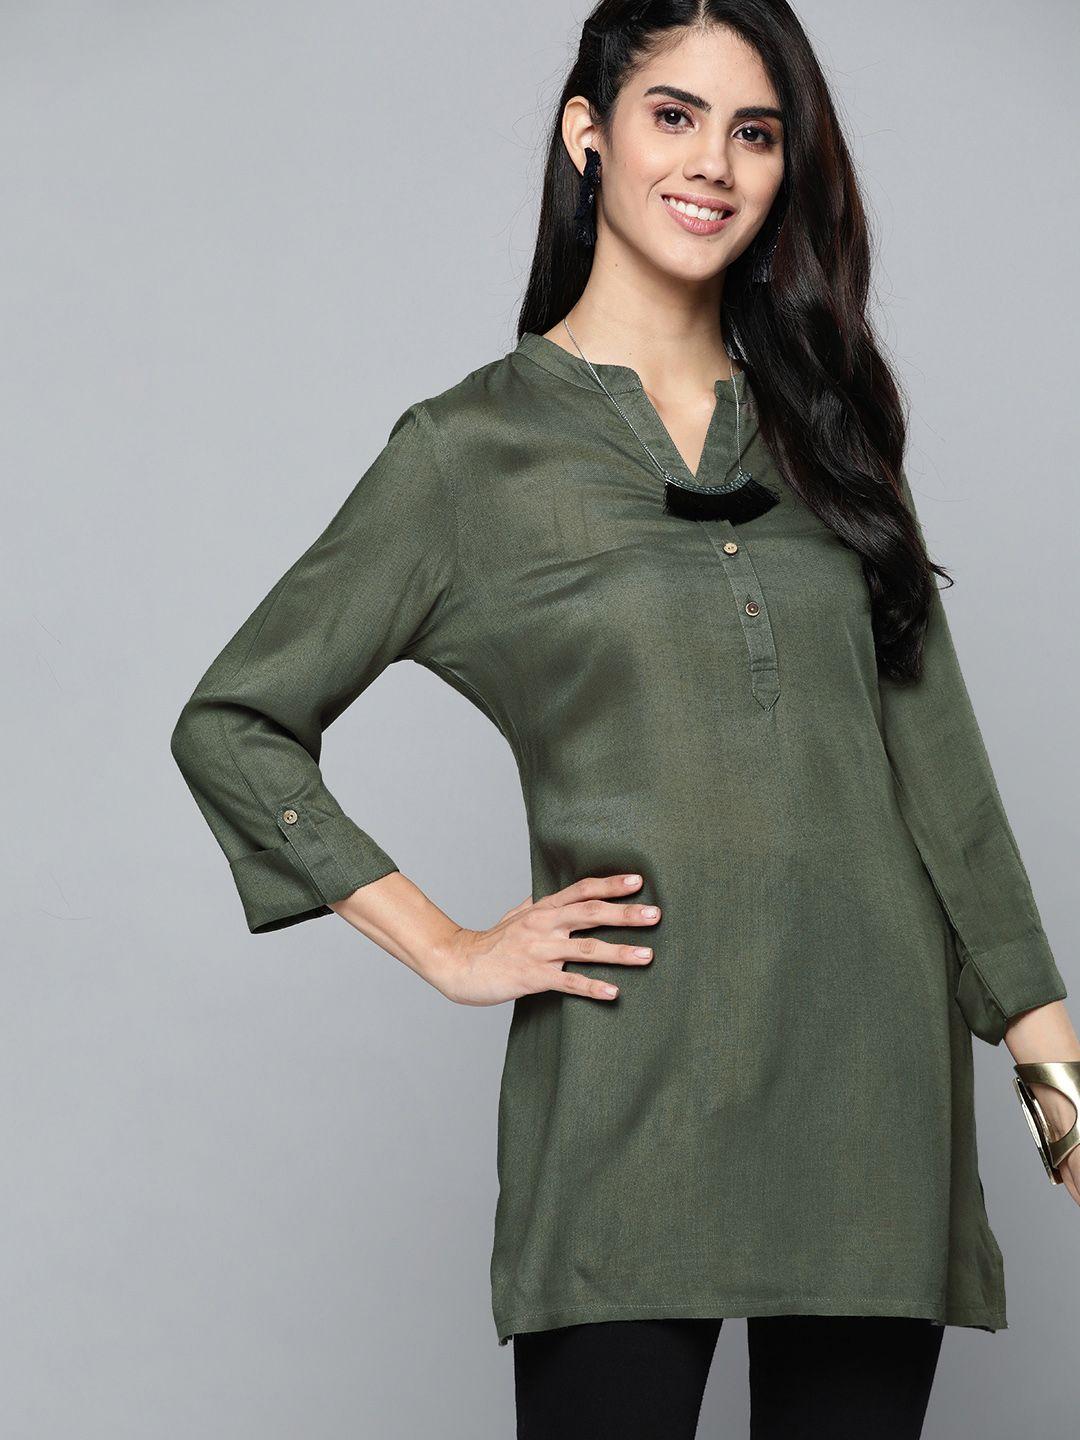 here&now women olive green solid kurti